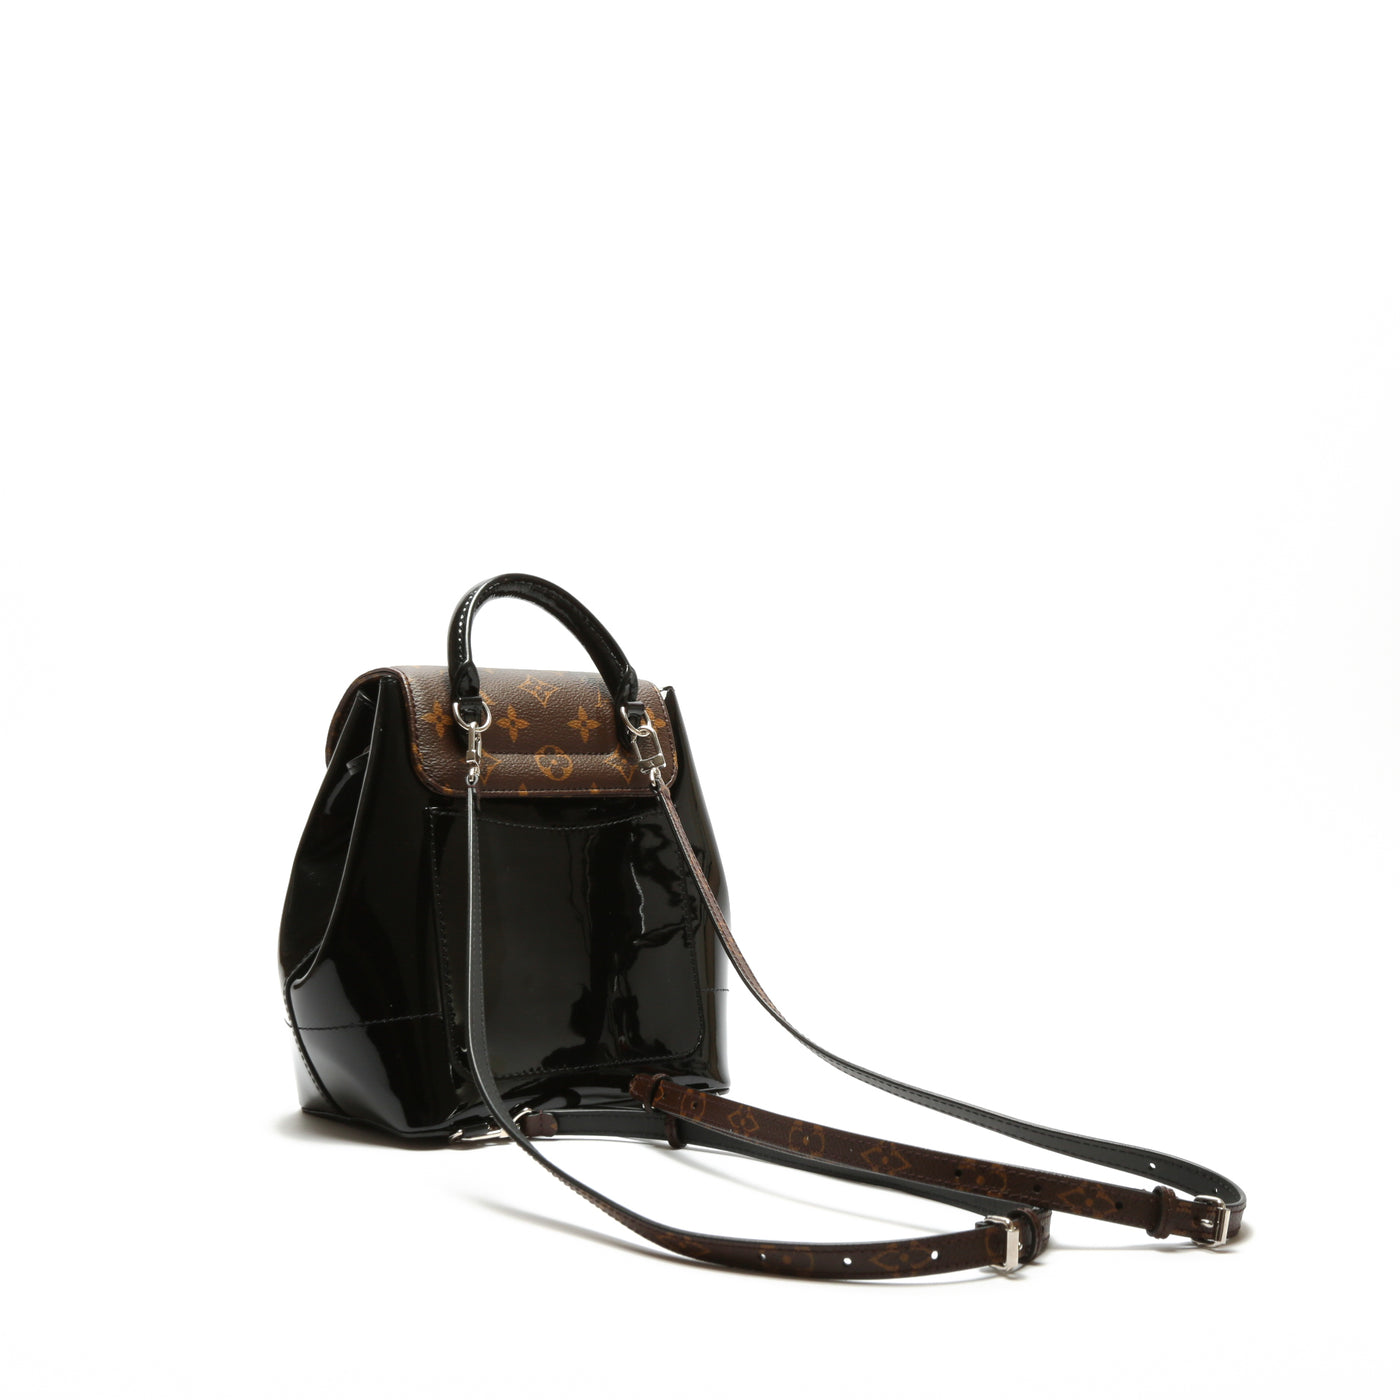 Hot Springs patent leather backpack